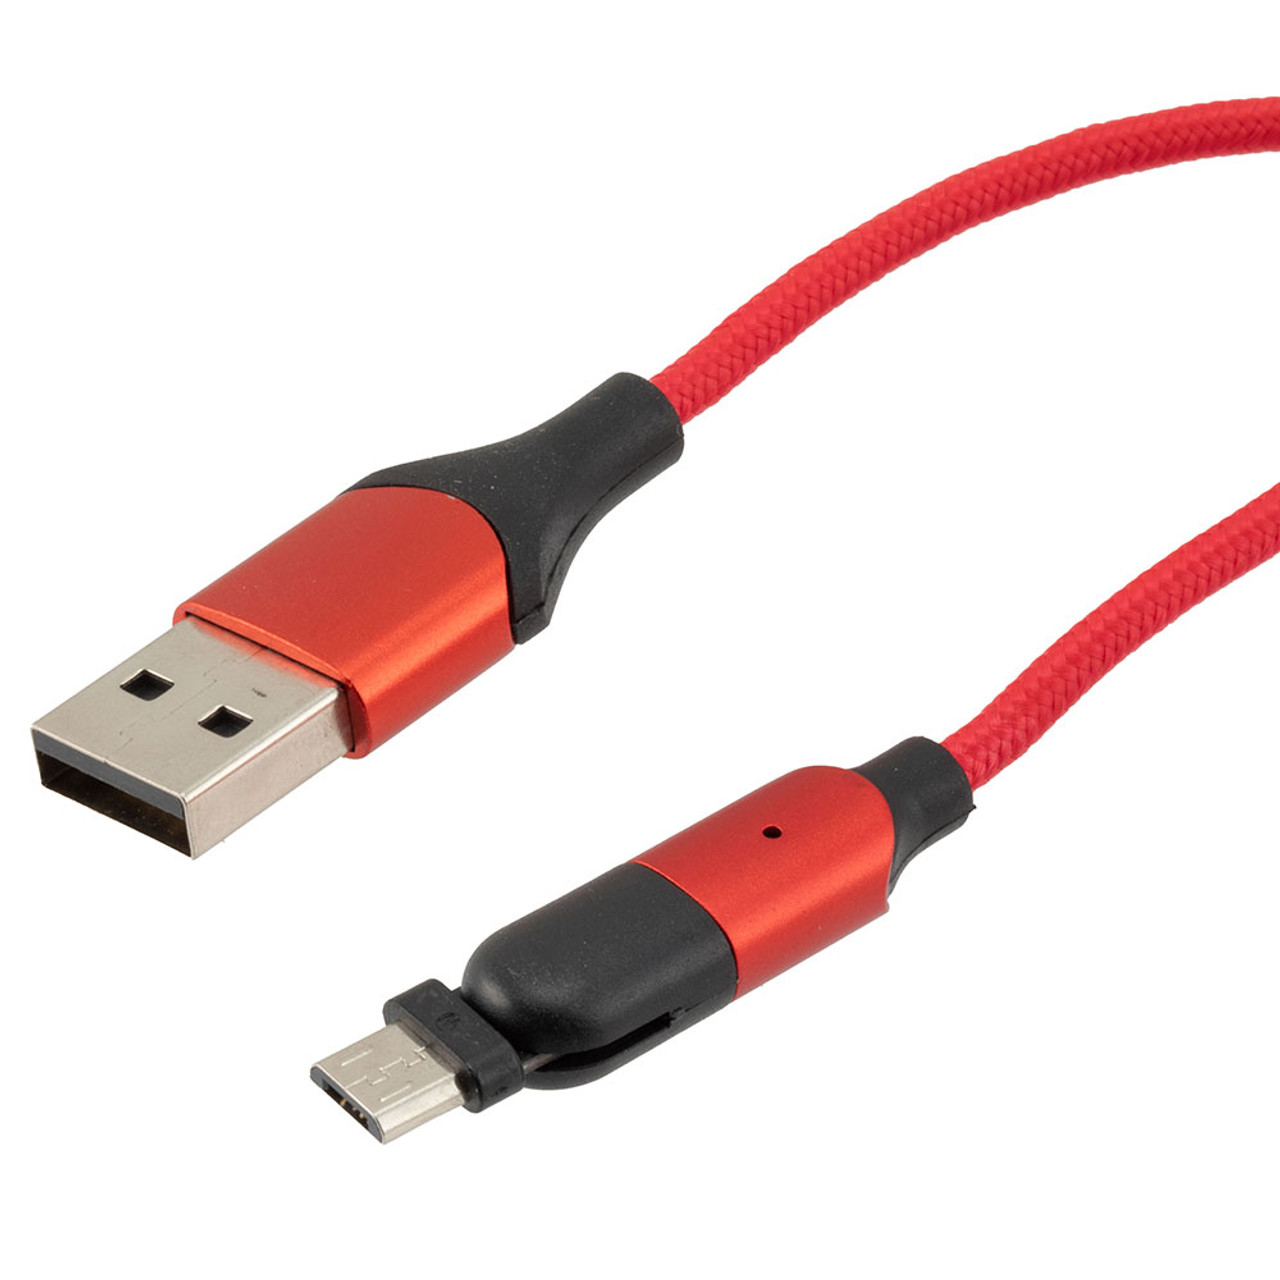 NavePoint USB 2.0 180-degree Rotating Head PVC Nylon Braided Cable, Red, USB A Male to USB Micro Male, 1 Meter 